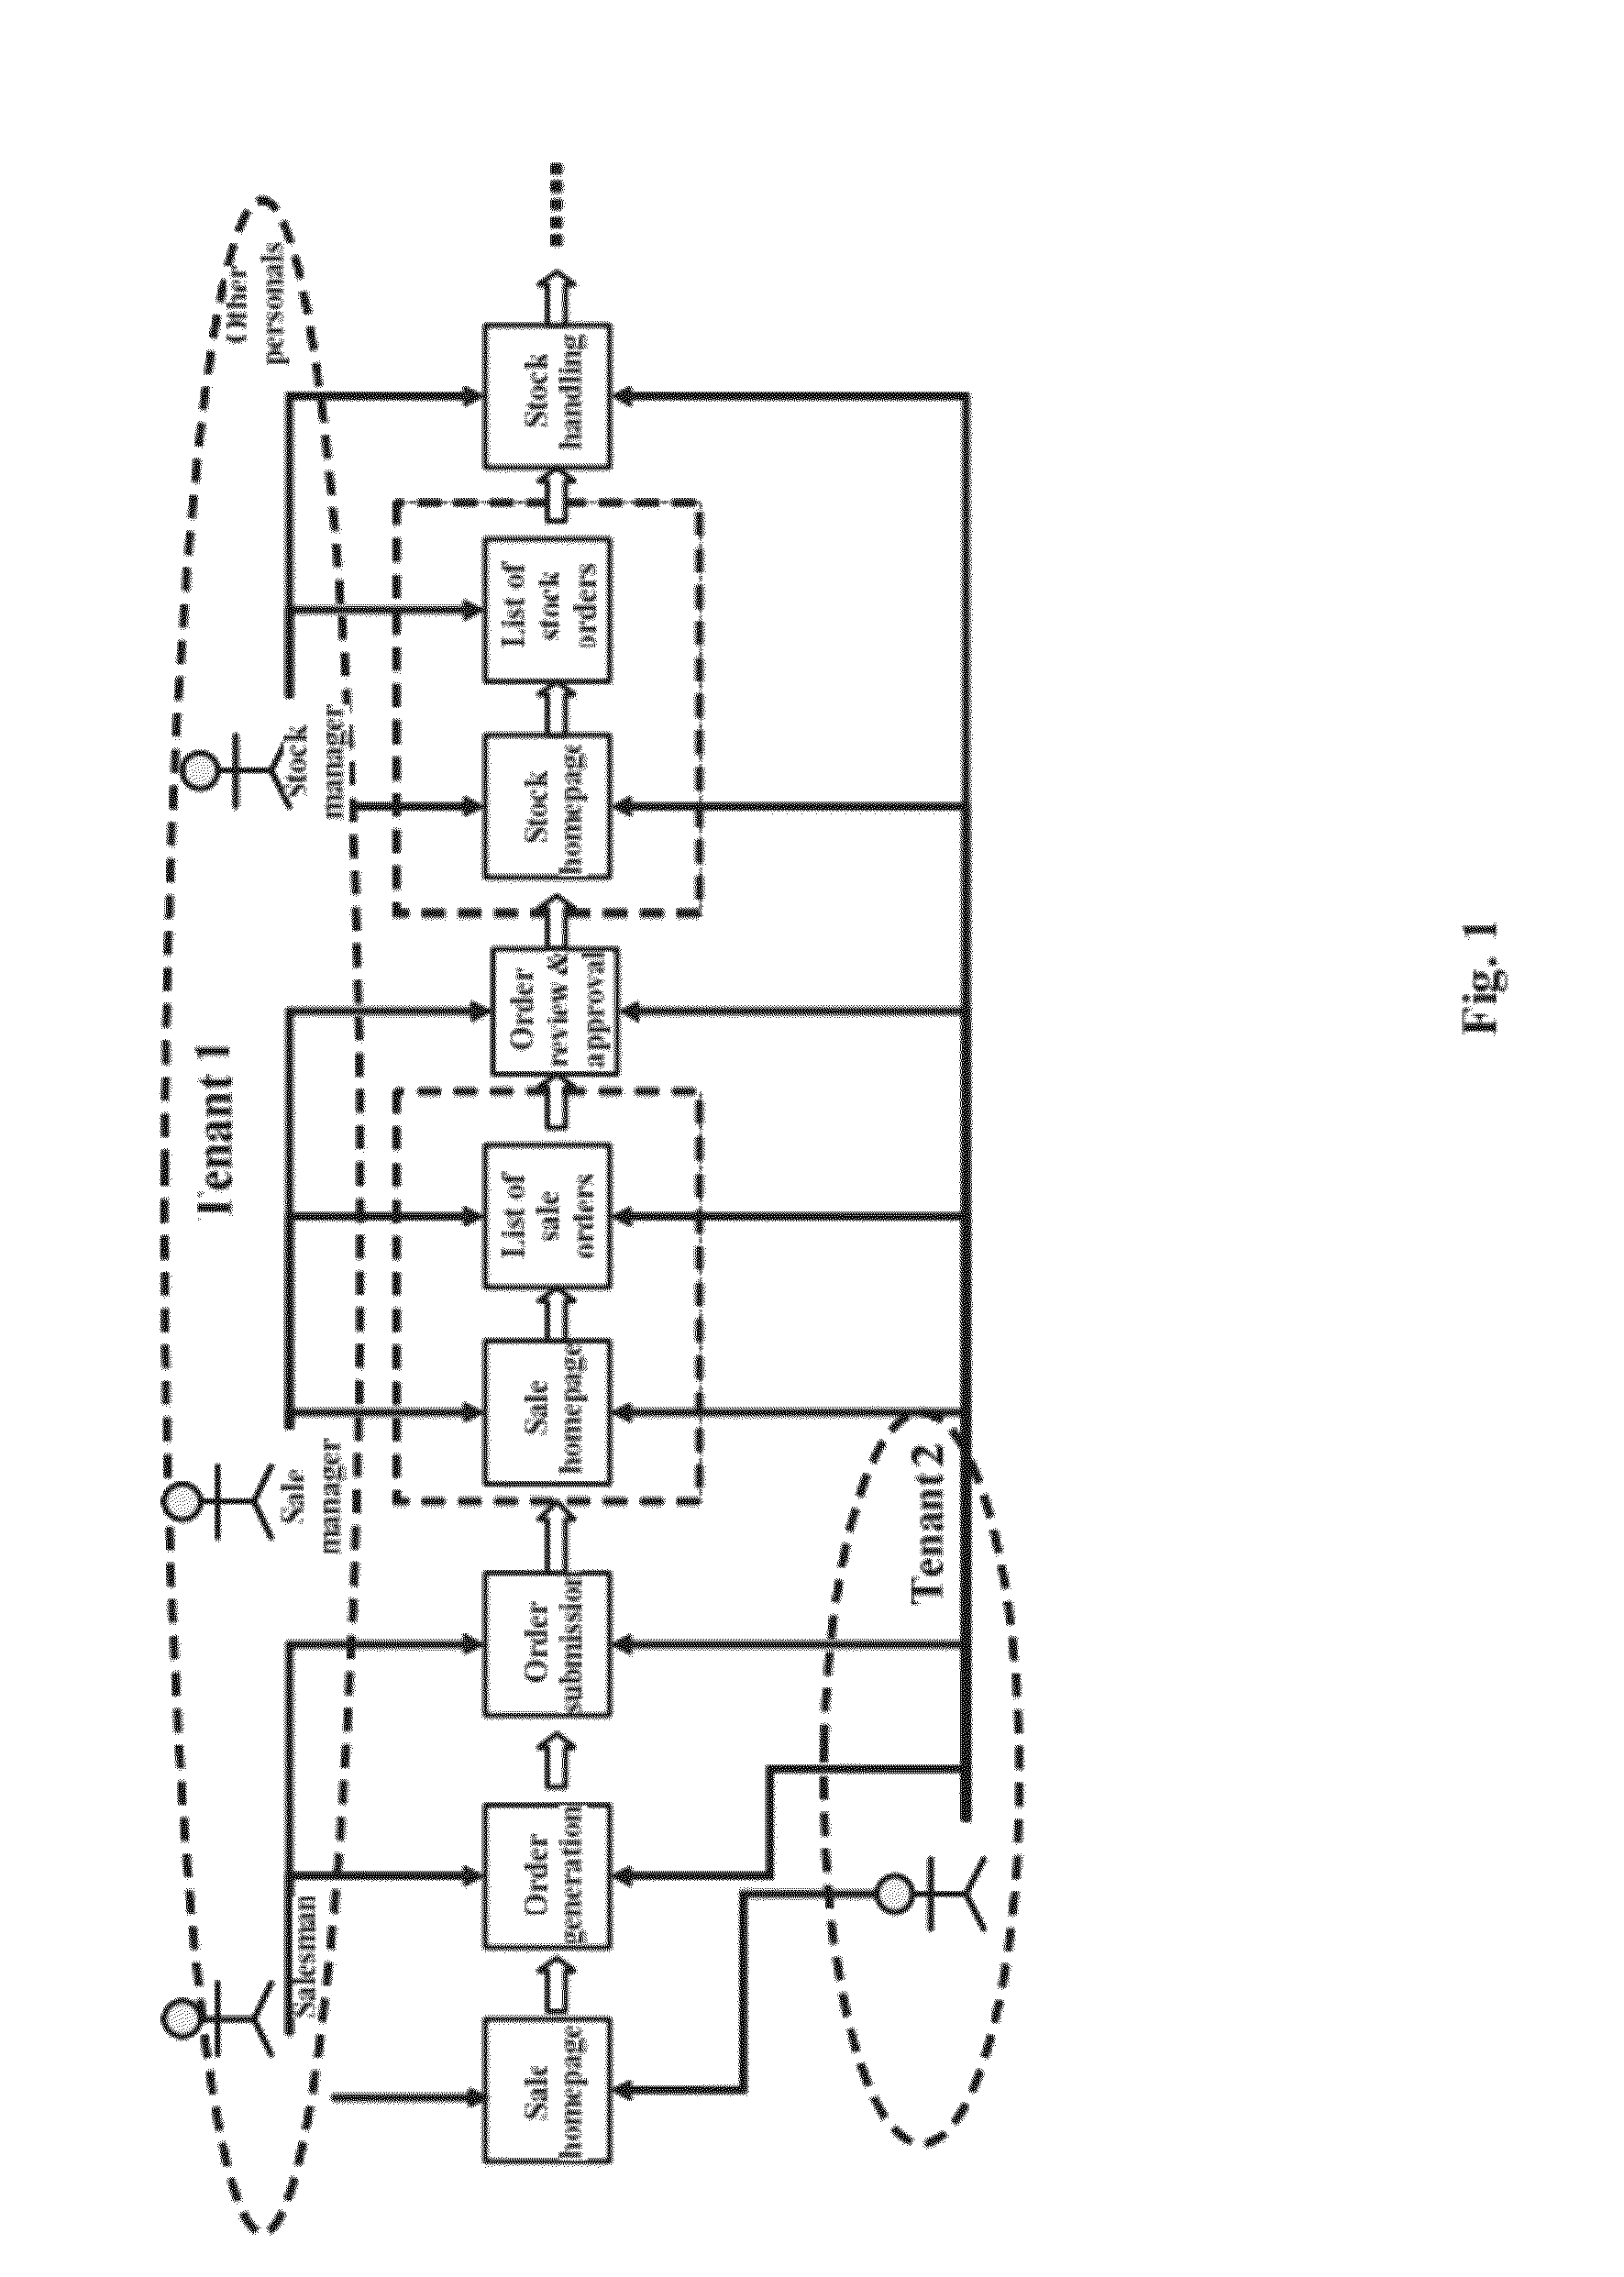 Providing Page Navigation in Multirole-Enabled Network Application